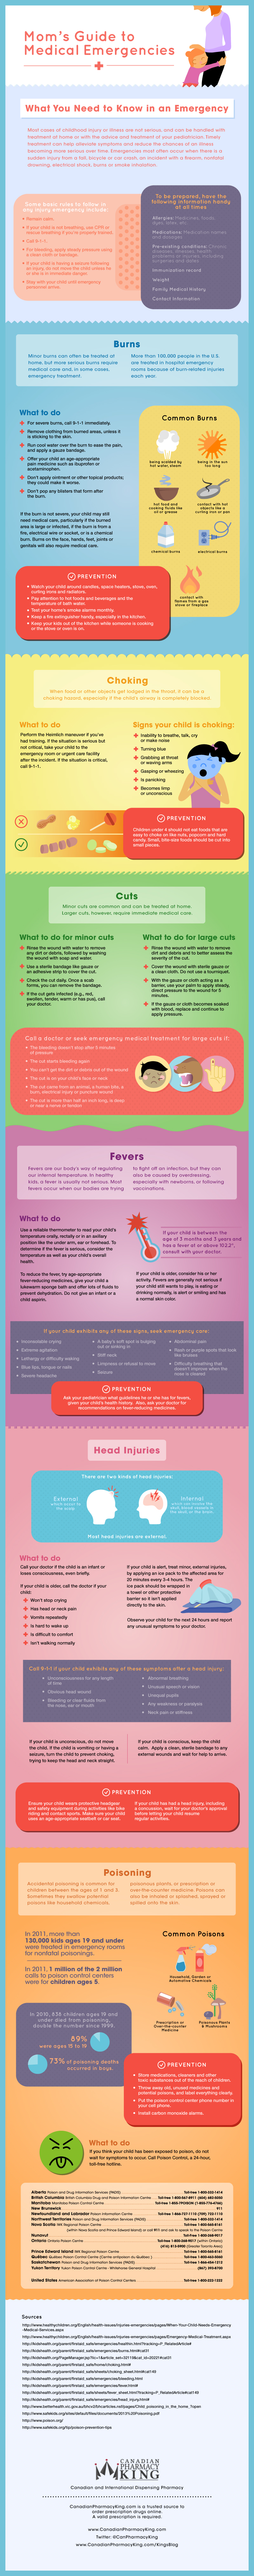 Mom's Guide to Medical Emergencies Infographic